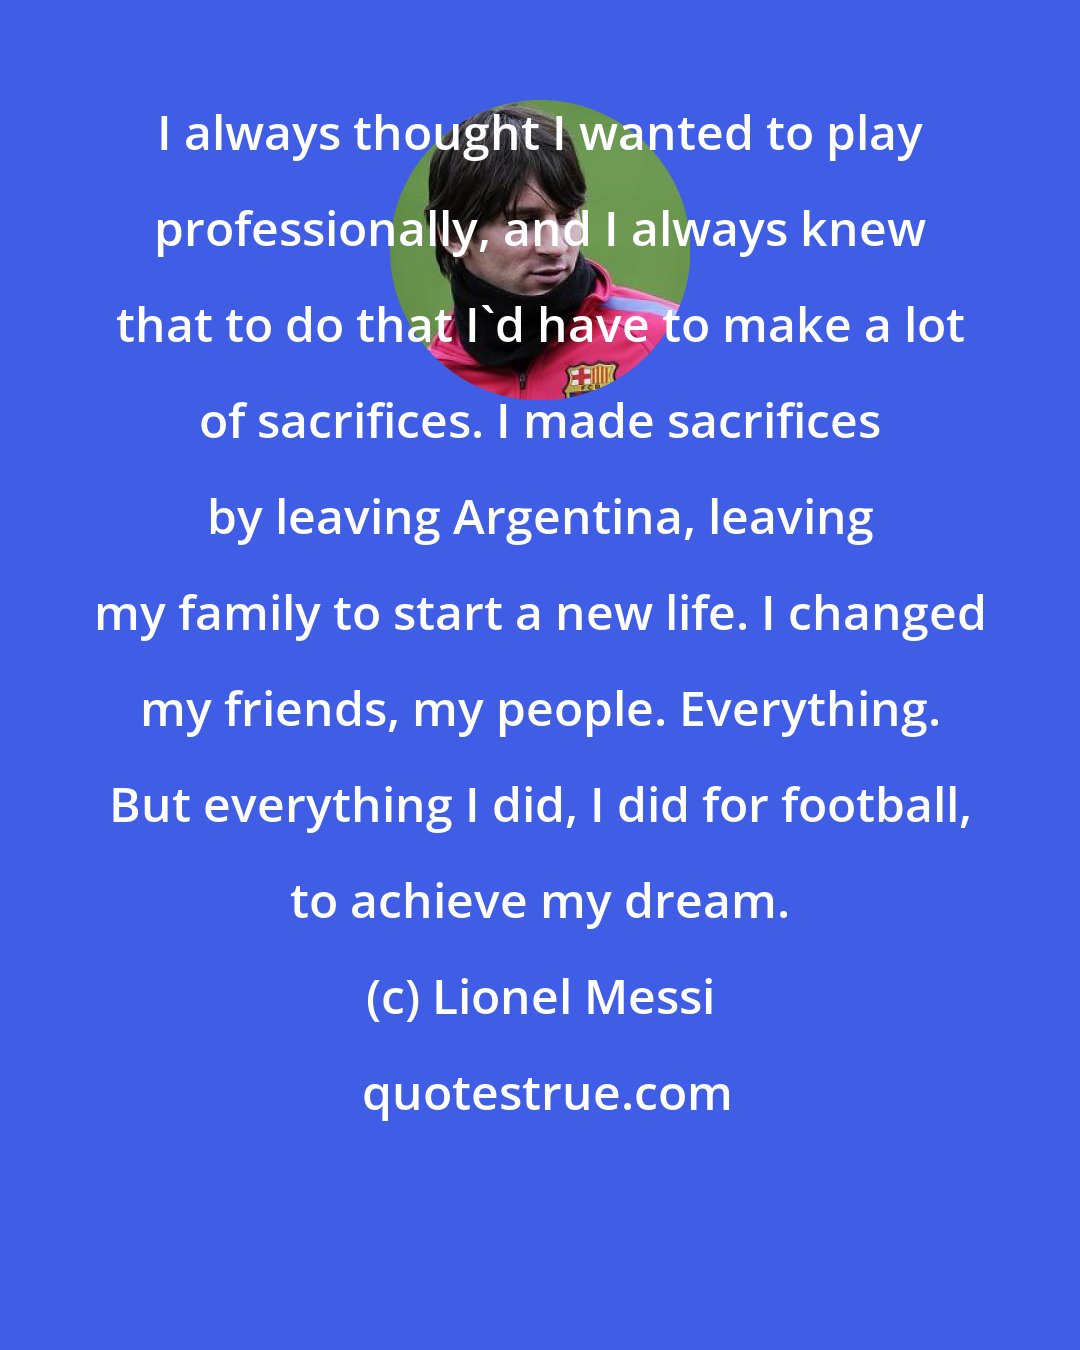 Lionel Messi: I always thought I wanted to play professionally, and I always knew that to do that I'd have to make a lot of sacrifices. I made sacrifices by leaving Argentina, leaving my family to start a new life. I changed my friends, my people. Everything. But everything I did, I did for football, to achieve my dream.